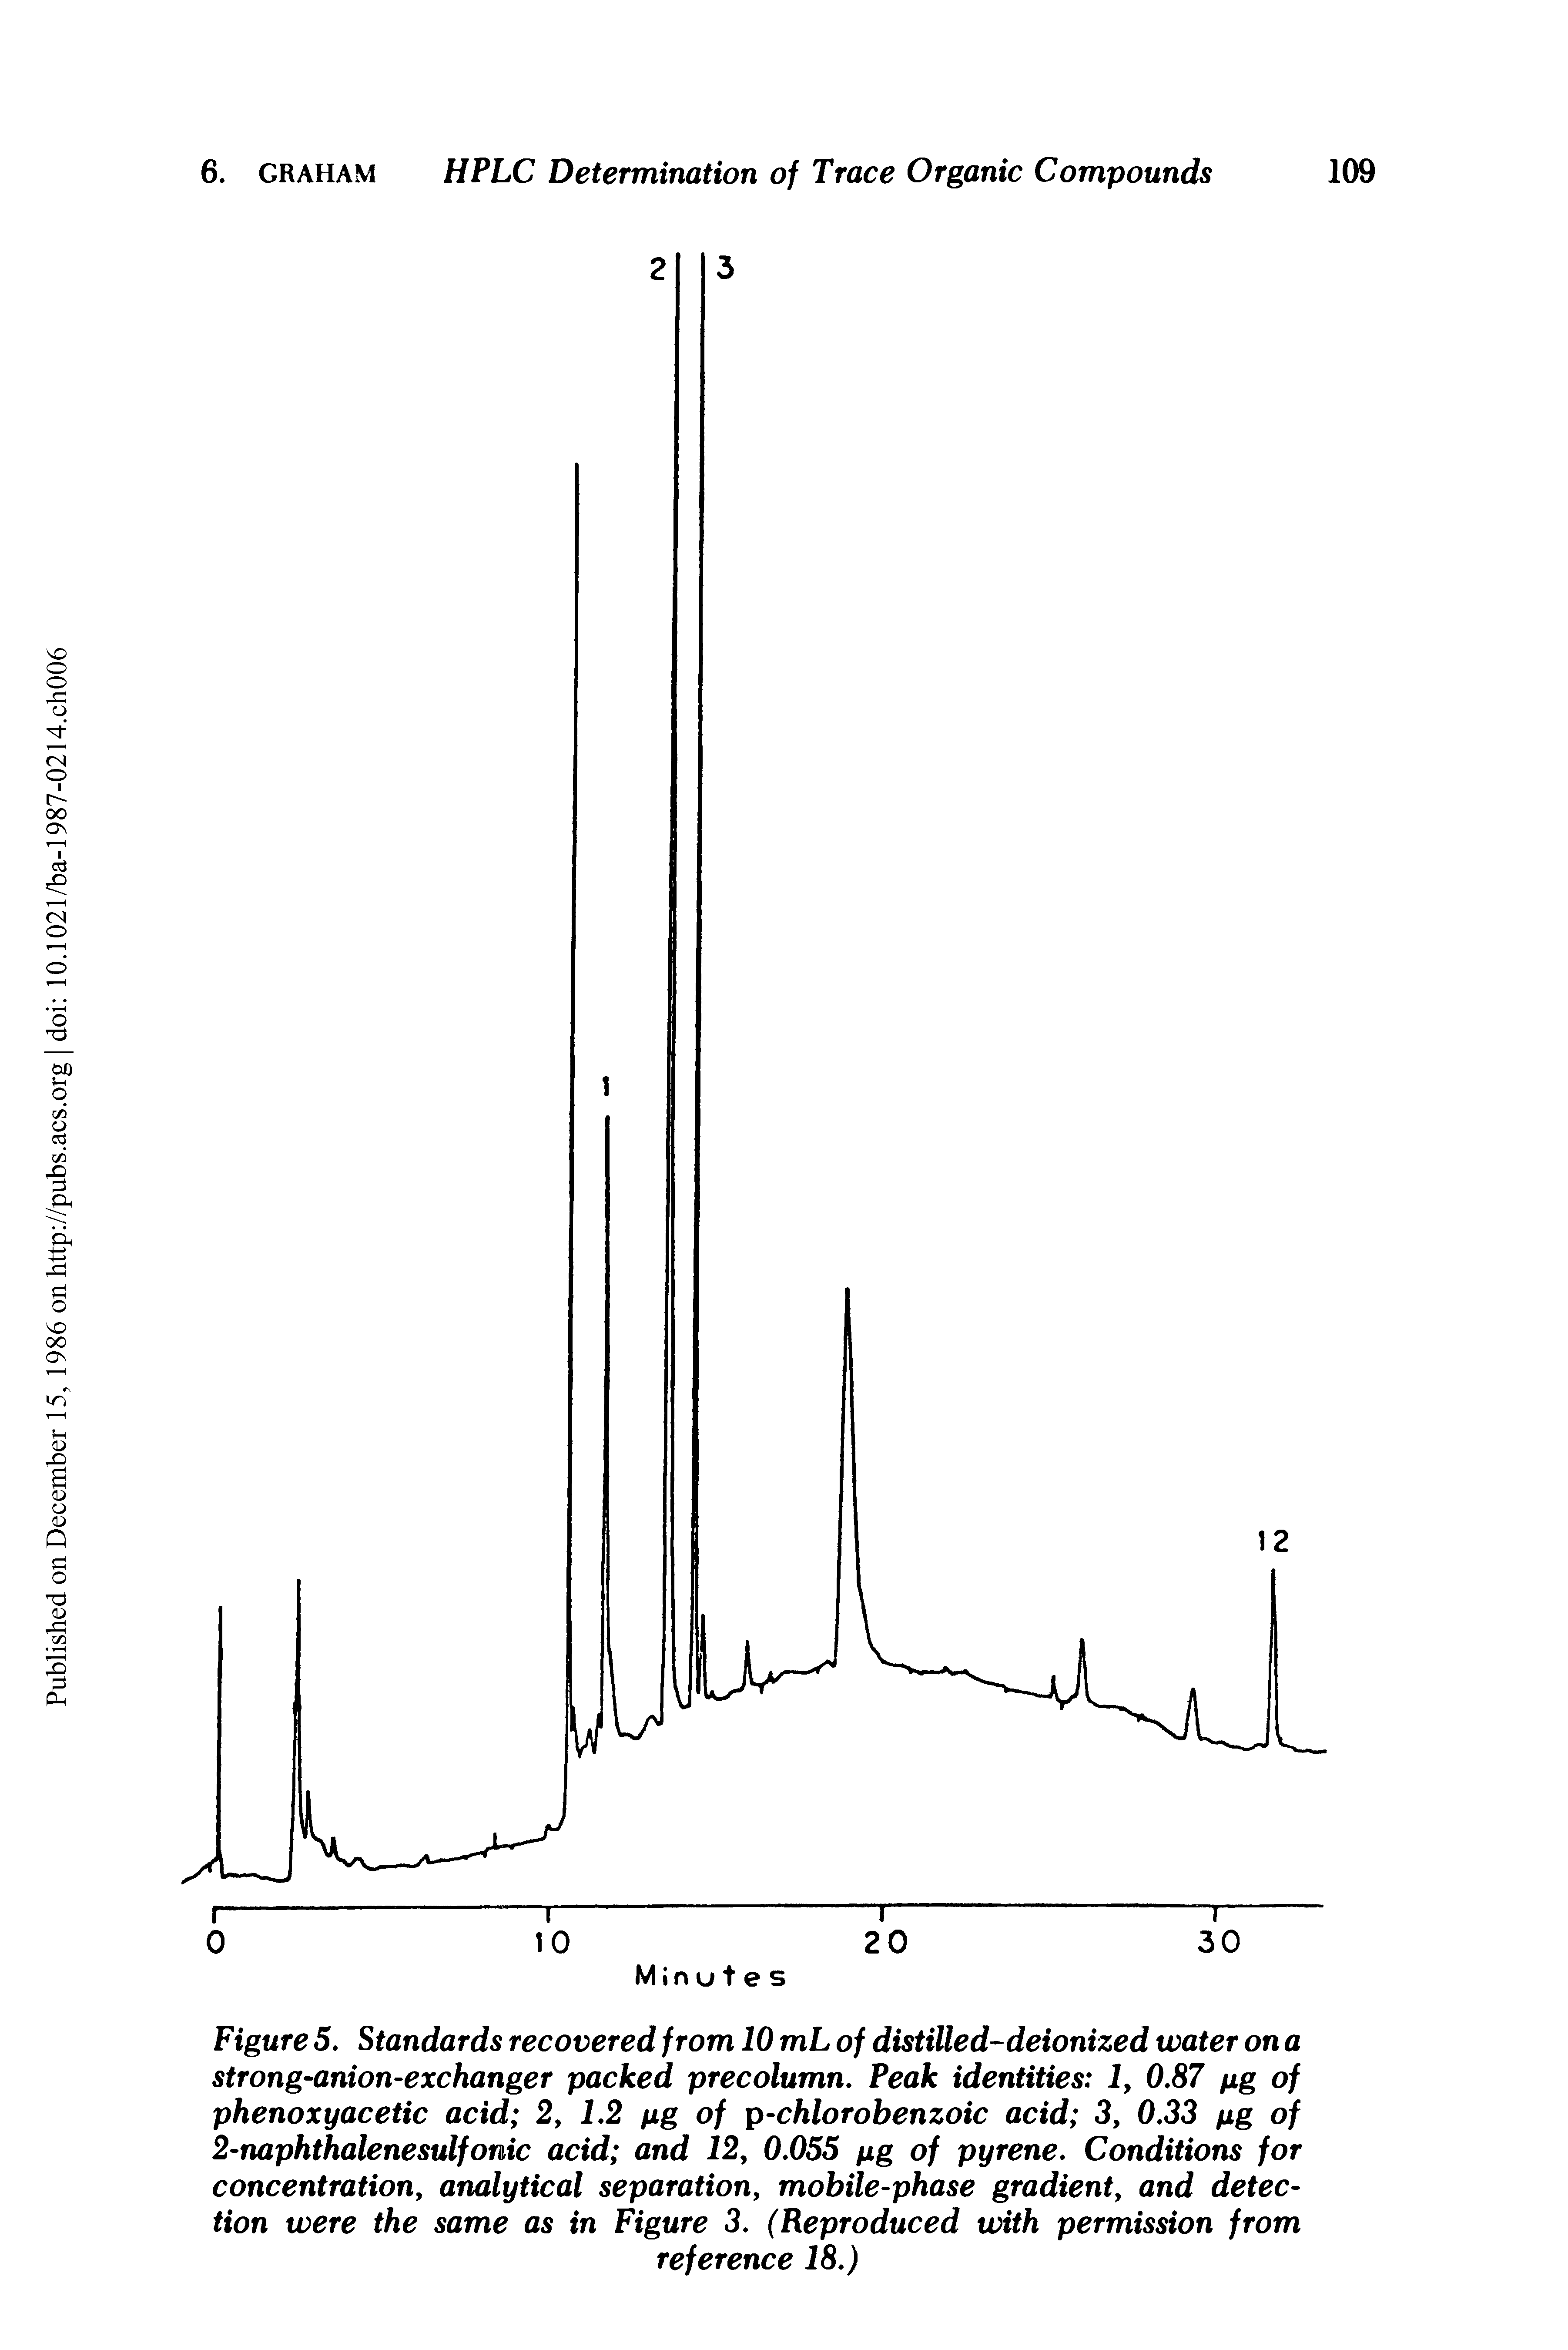 Figure 5. Standards recovered from 10 mL of distilled-deionized water on a strong-anion-exchanger packed precolumn. Peak identities 1, 0.87 pg of phenoxyacetic acid 2, 1.2 pg of p-chlorobenzoic acid 3, 0.33 pg of 2-naphthalenesulfonic acid and 12, 0.055 pg of pyrene. Conditions for concentration, analytical separation, mobile-phase gradient, and detection were the same as in Figure 3. (Reproduced with permission from...